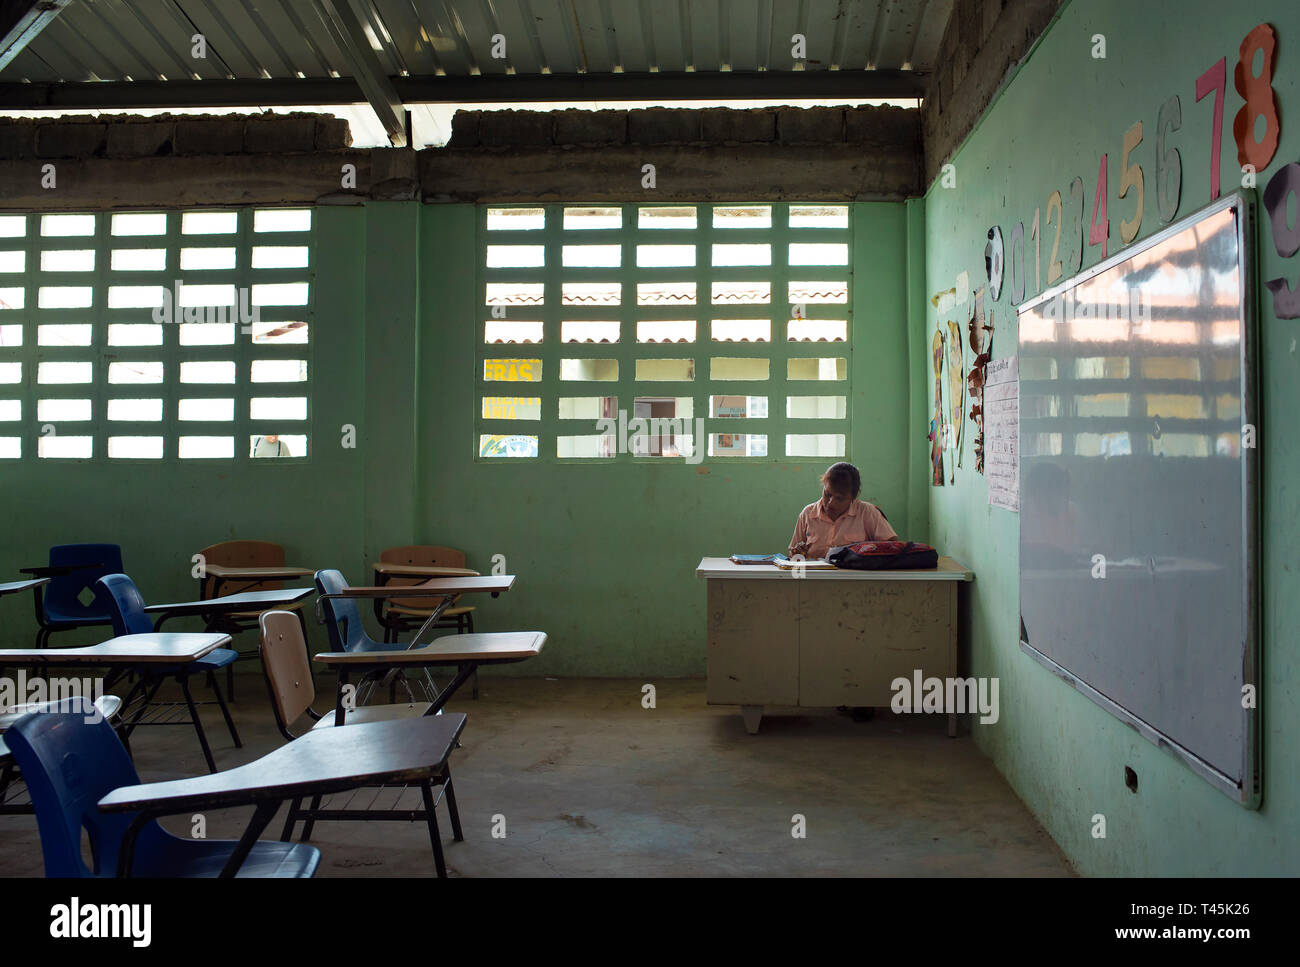 Occupied teacher working in the classroom after giving a class. Carti Sugdub; Guna Yala indigenous villages. San Blas Islands, Panama, Oct 2018 Stock Photo